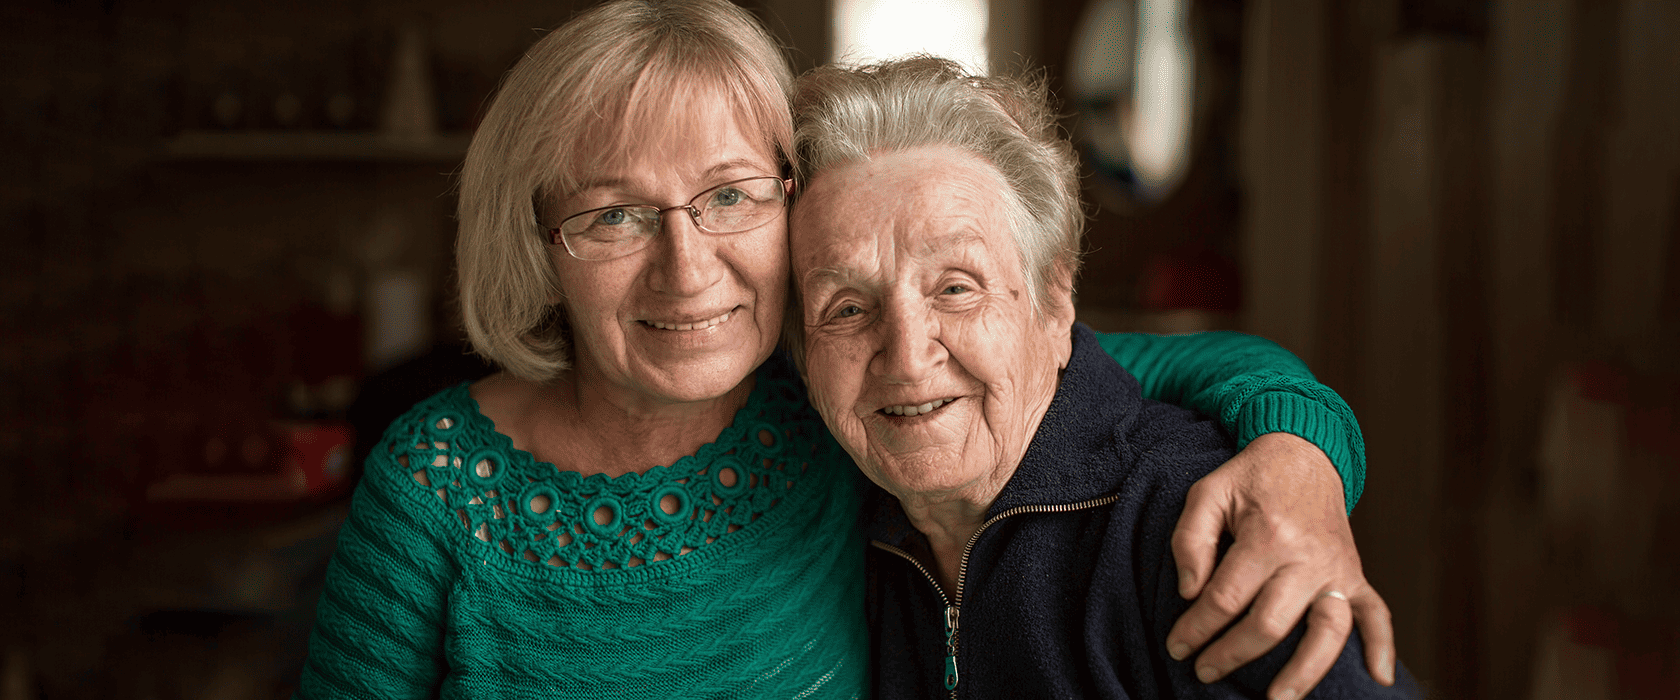 Top 5 Tips to Help Your Parents Age in Place